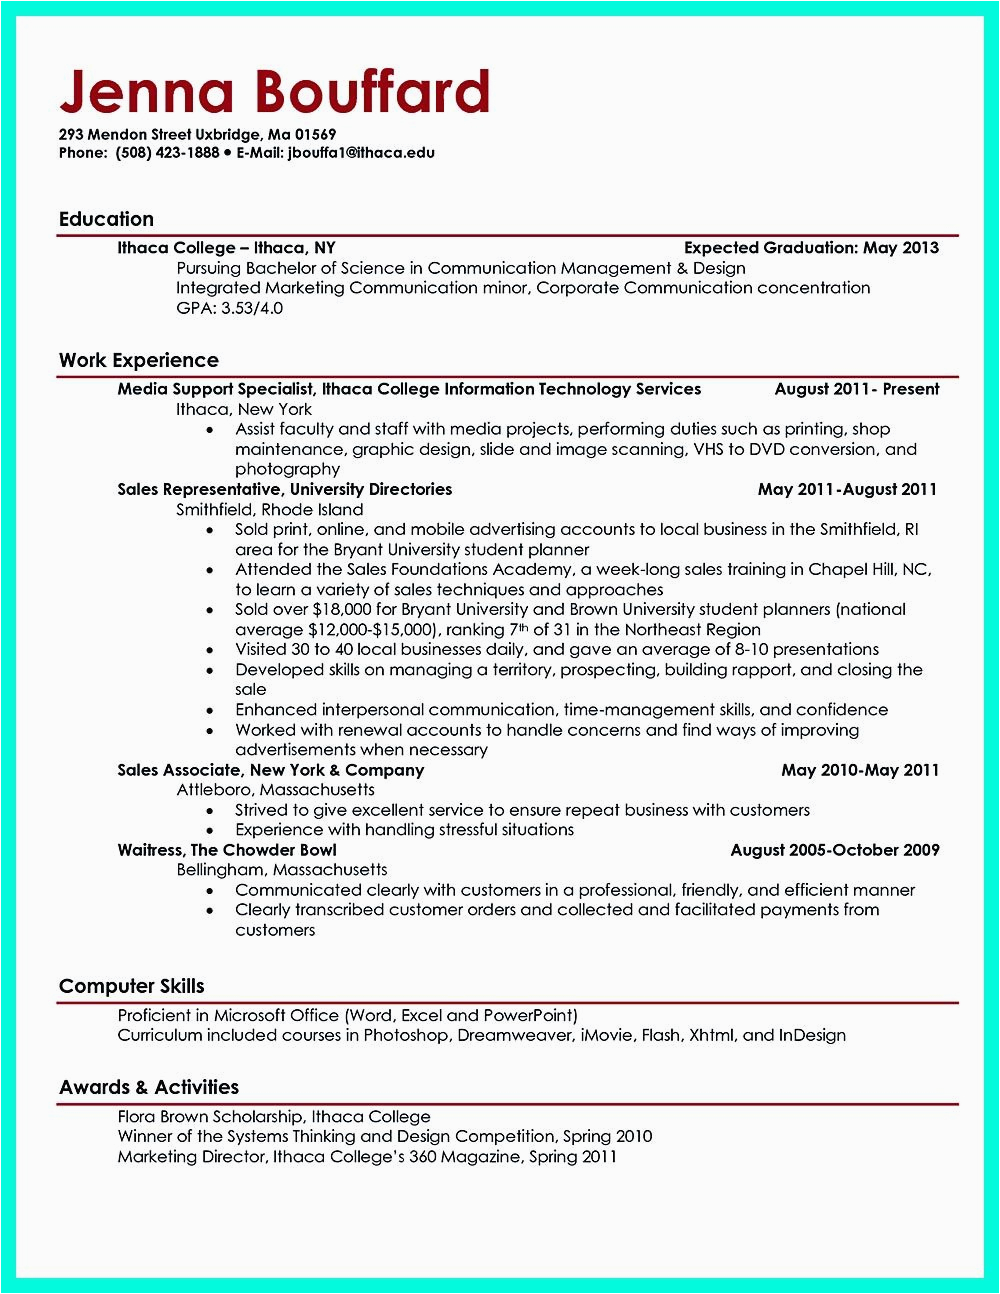 Sample Resume Objective for soon to Be College Graduate Best Current College Student Resume with No Experience